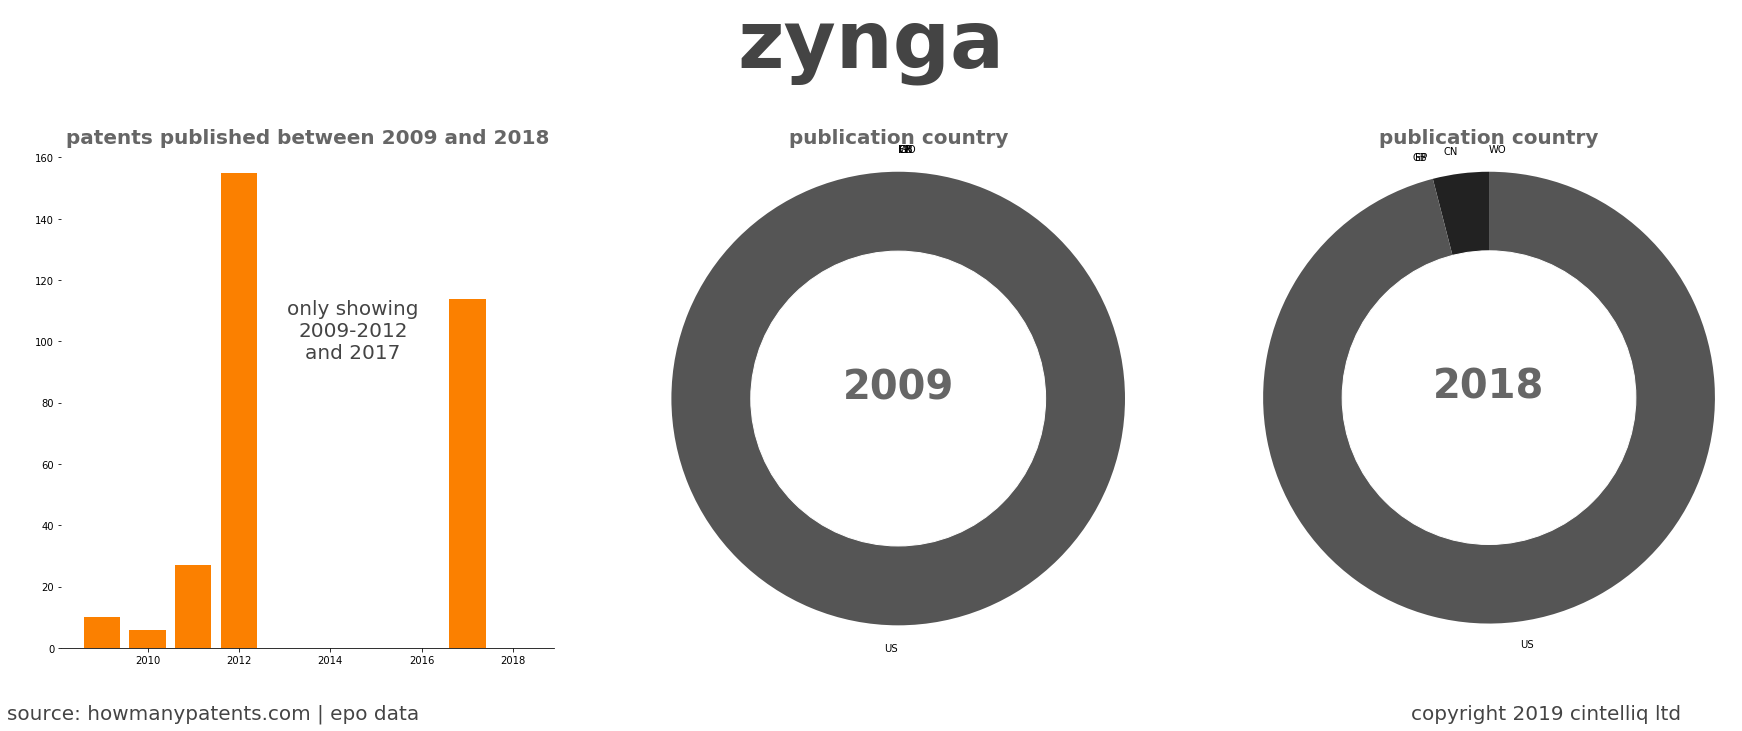 summary of patents for Zynga